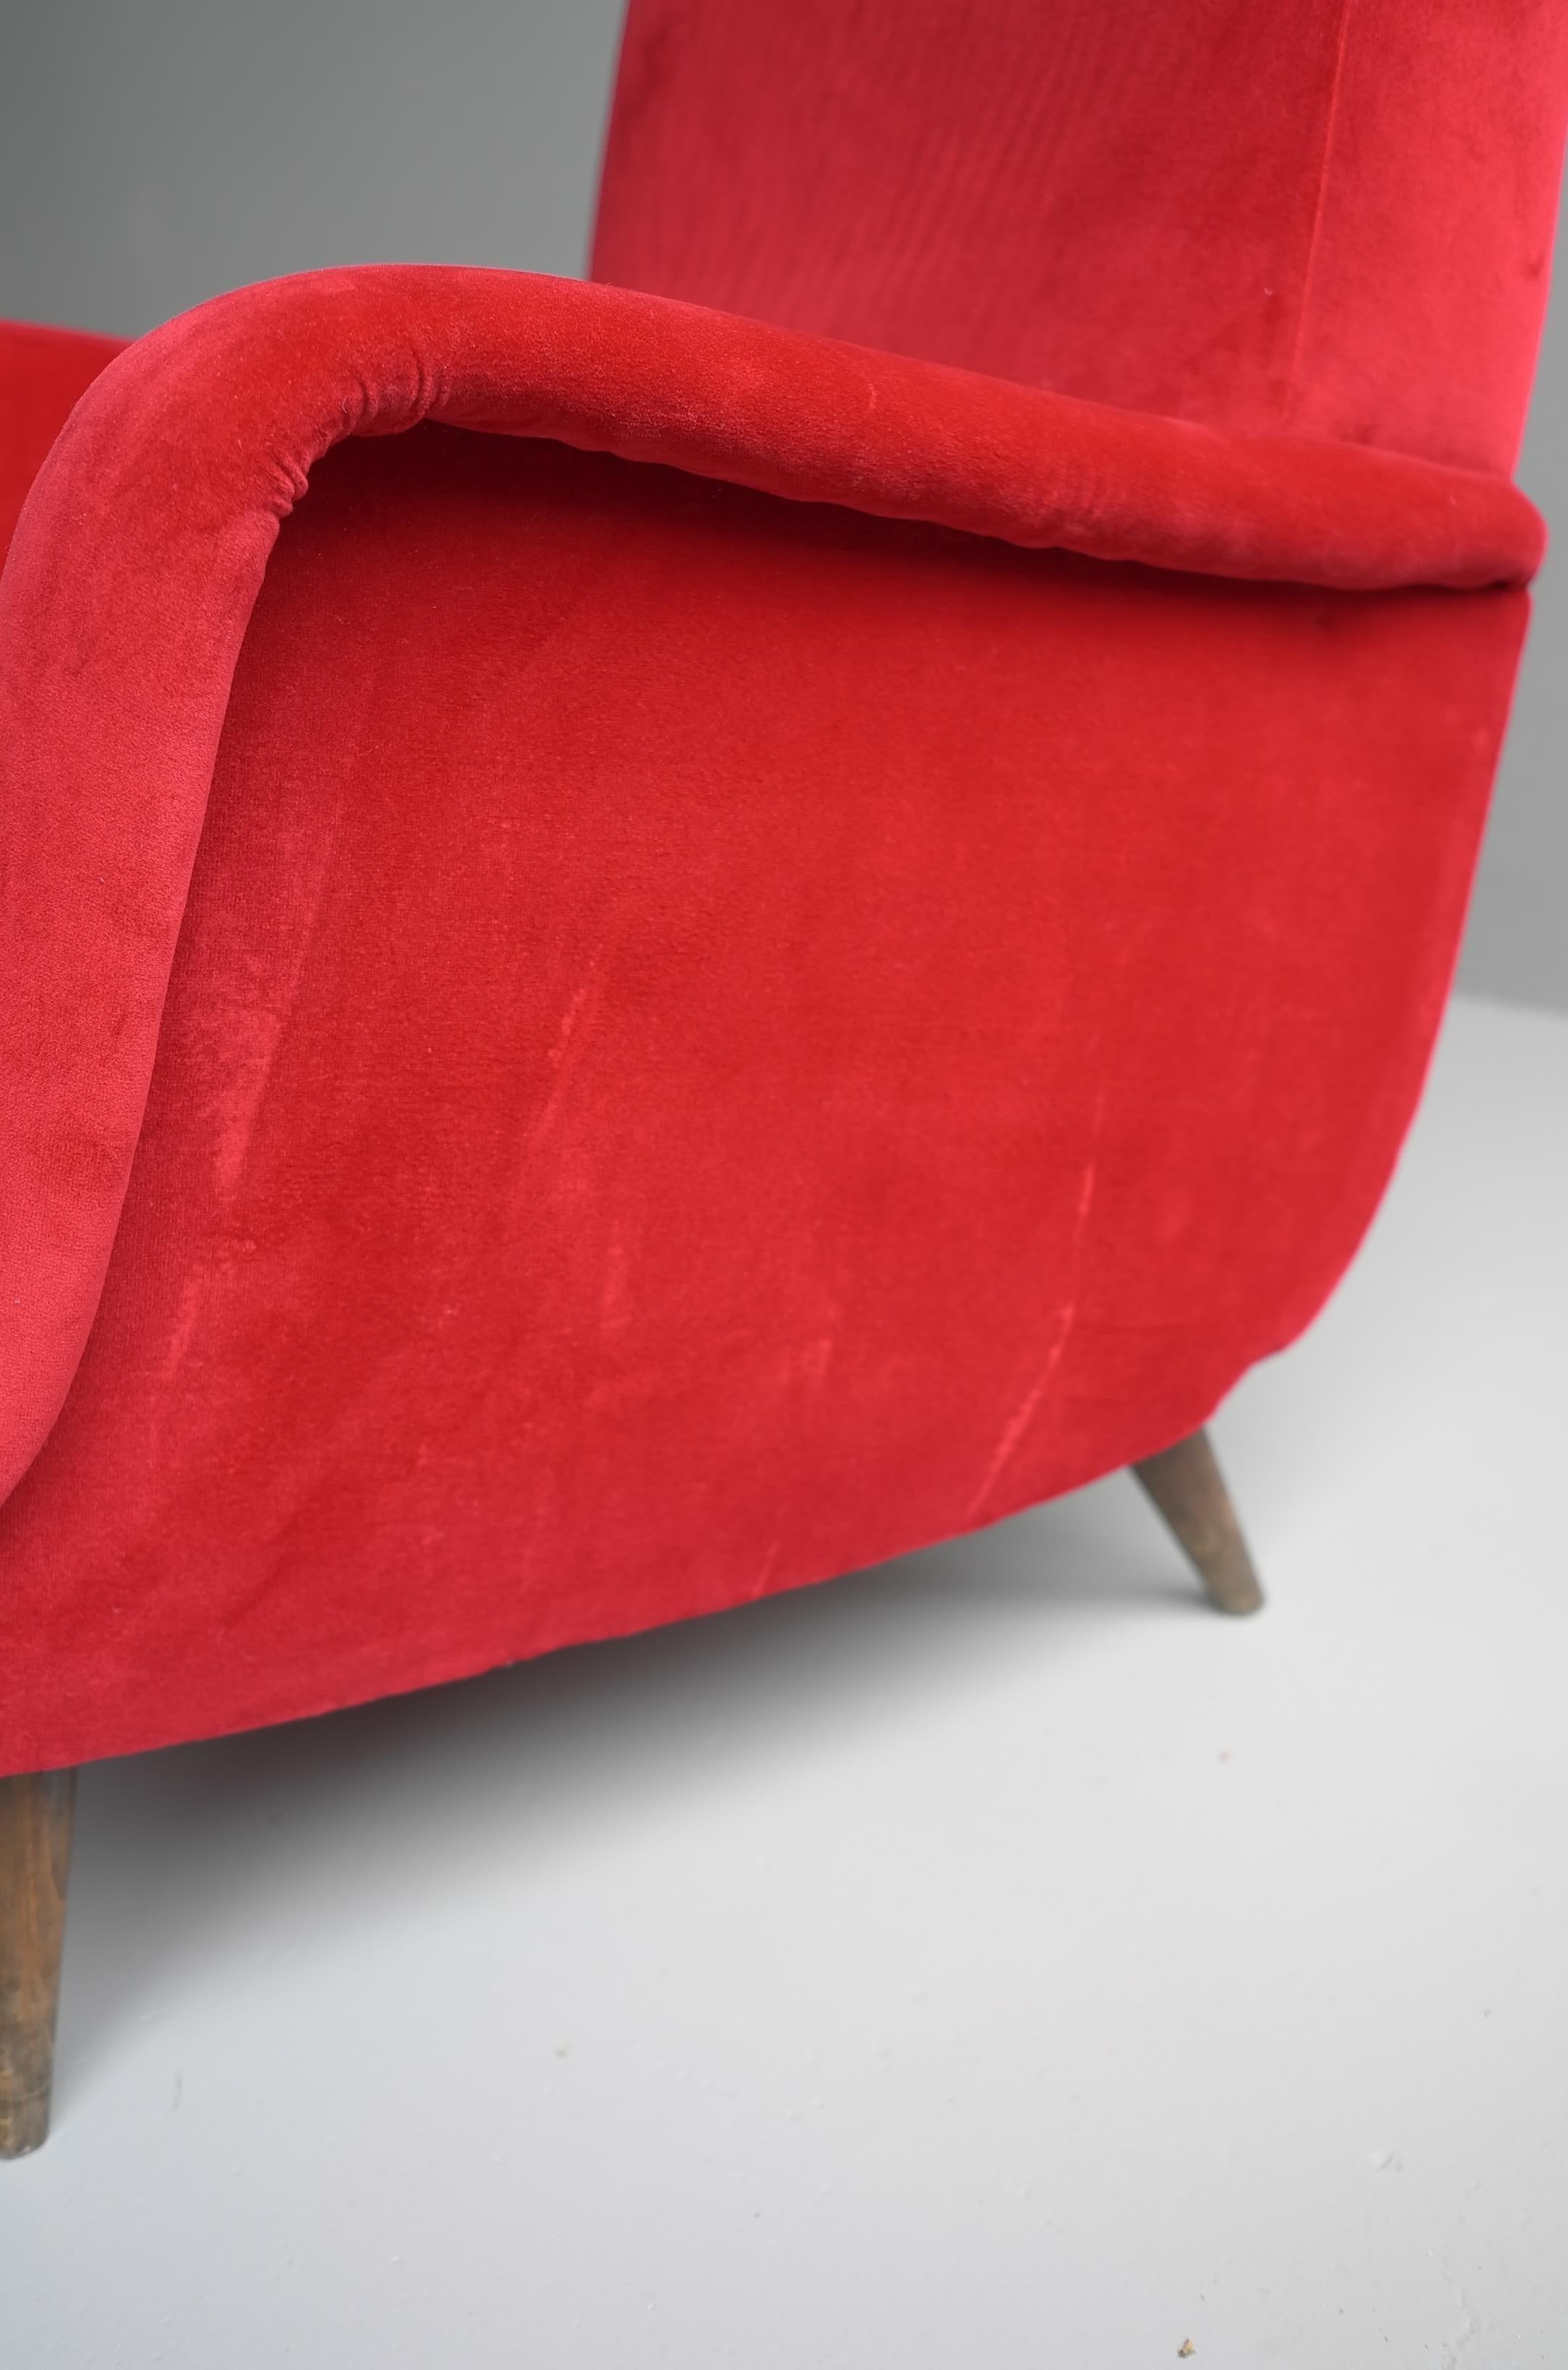 Carlo de Carli Red velvet and Walnut Armchair Model 806 by Cassina, Italy, 1955 For Sale 6